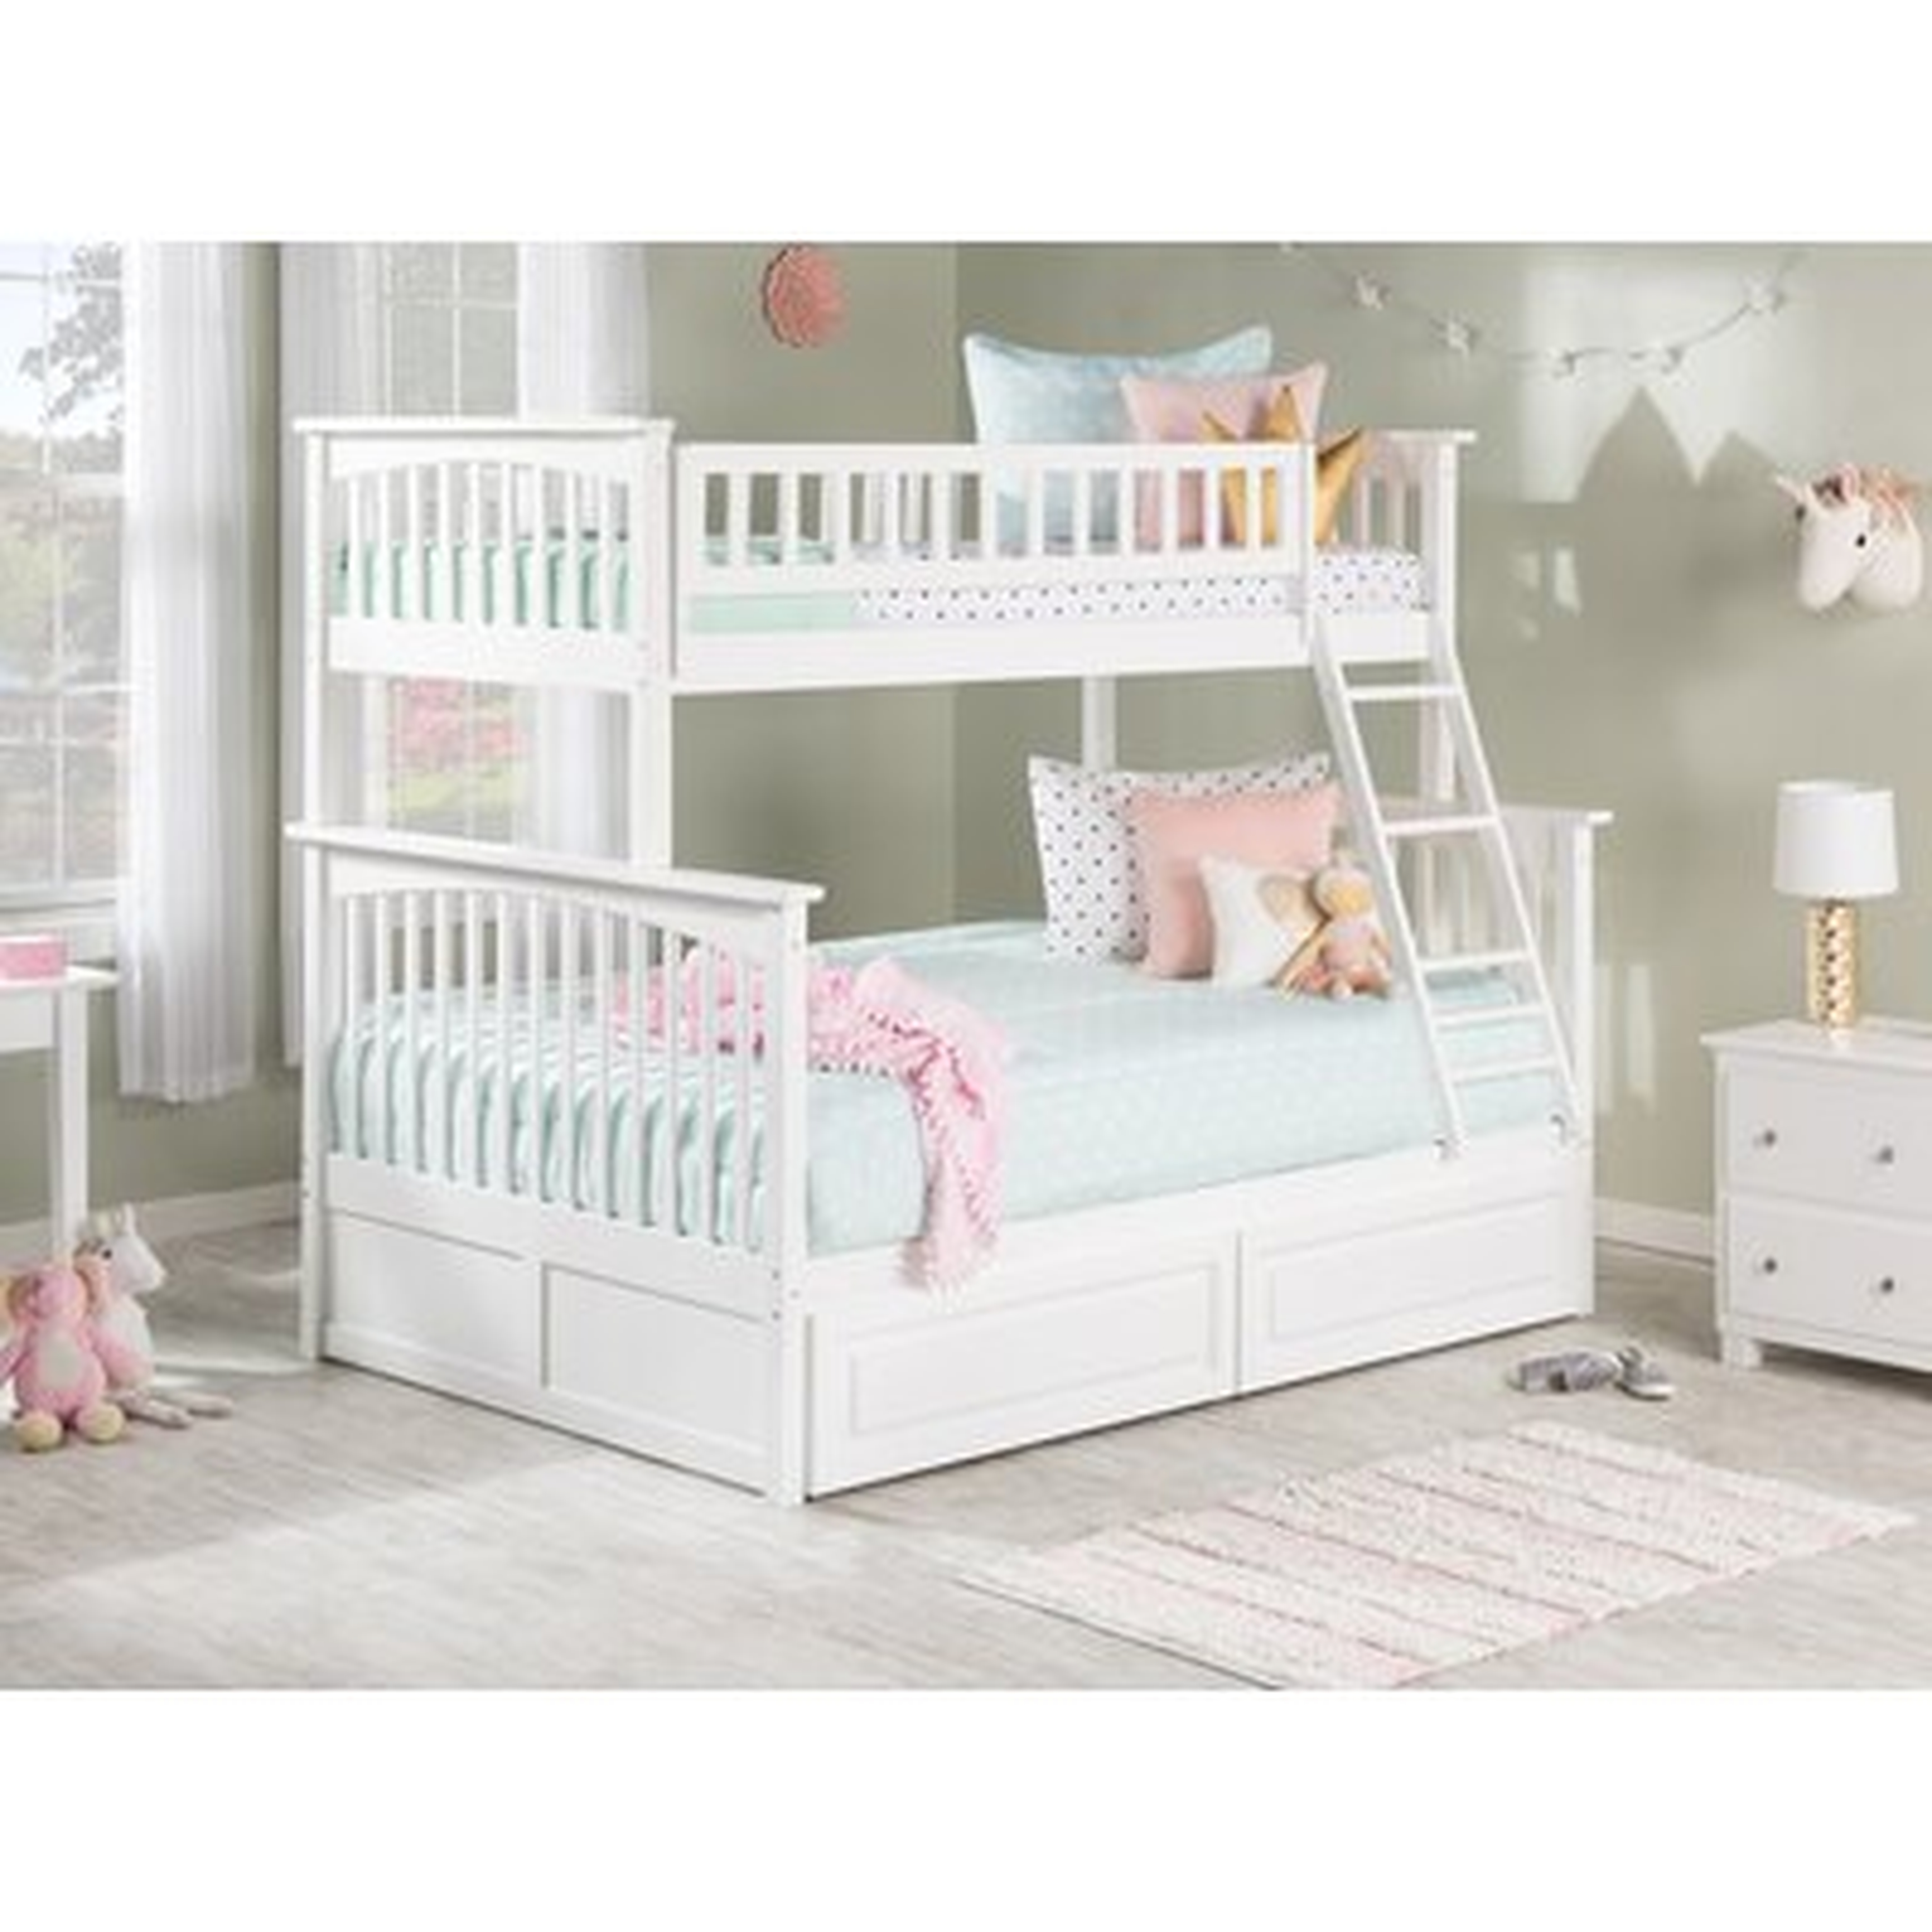 Henry Bunk Bed with Storage (Converts to twin beds) - Wayfair